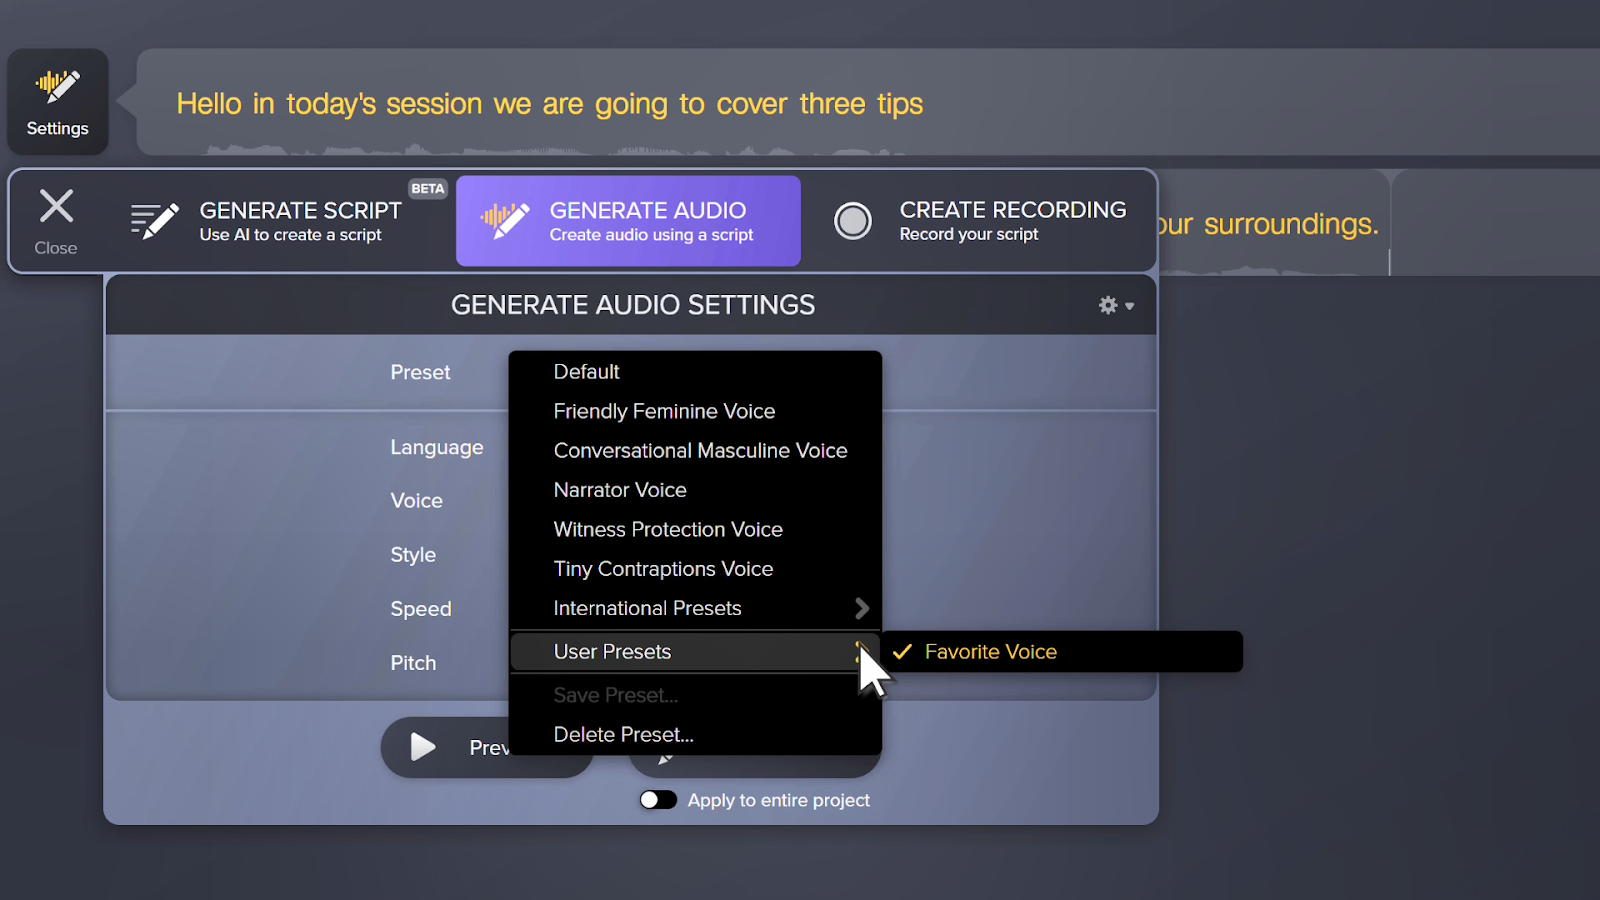 Image of User Presets that has a Favorite Voice option for use later on.